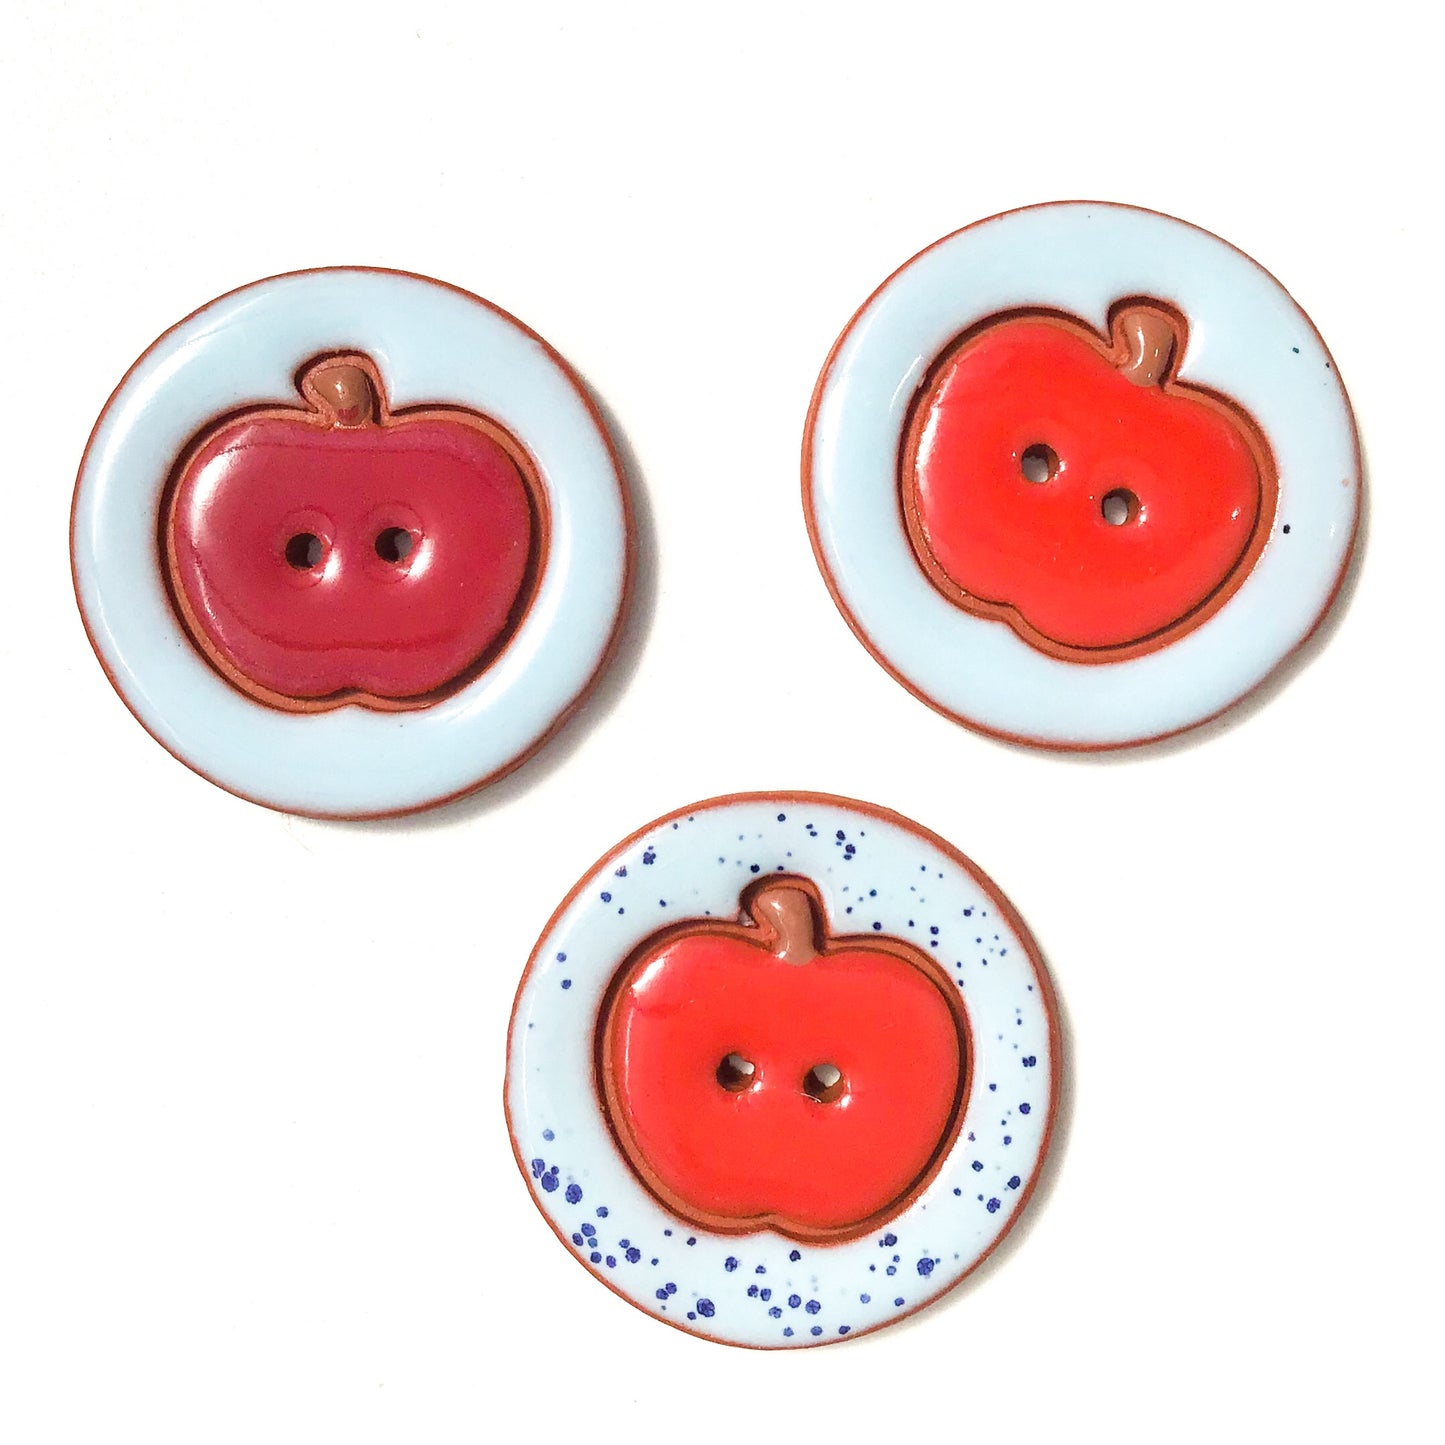 Ceramic Apple Buttons - Clay Apple Buttons - 1 7/16"